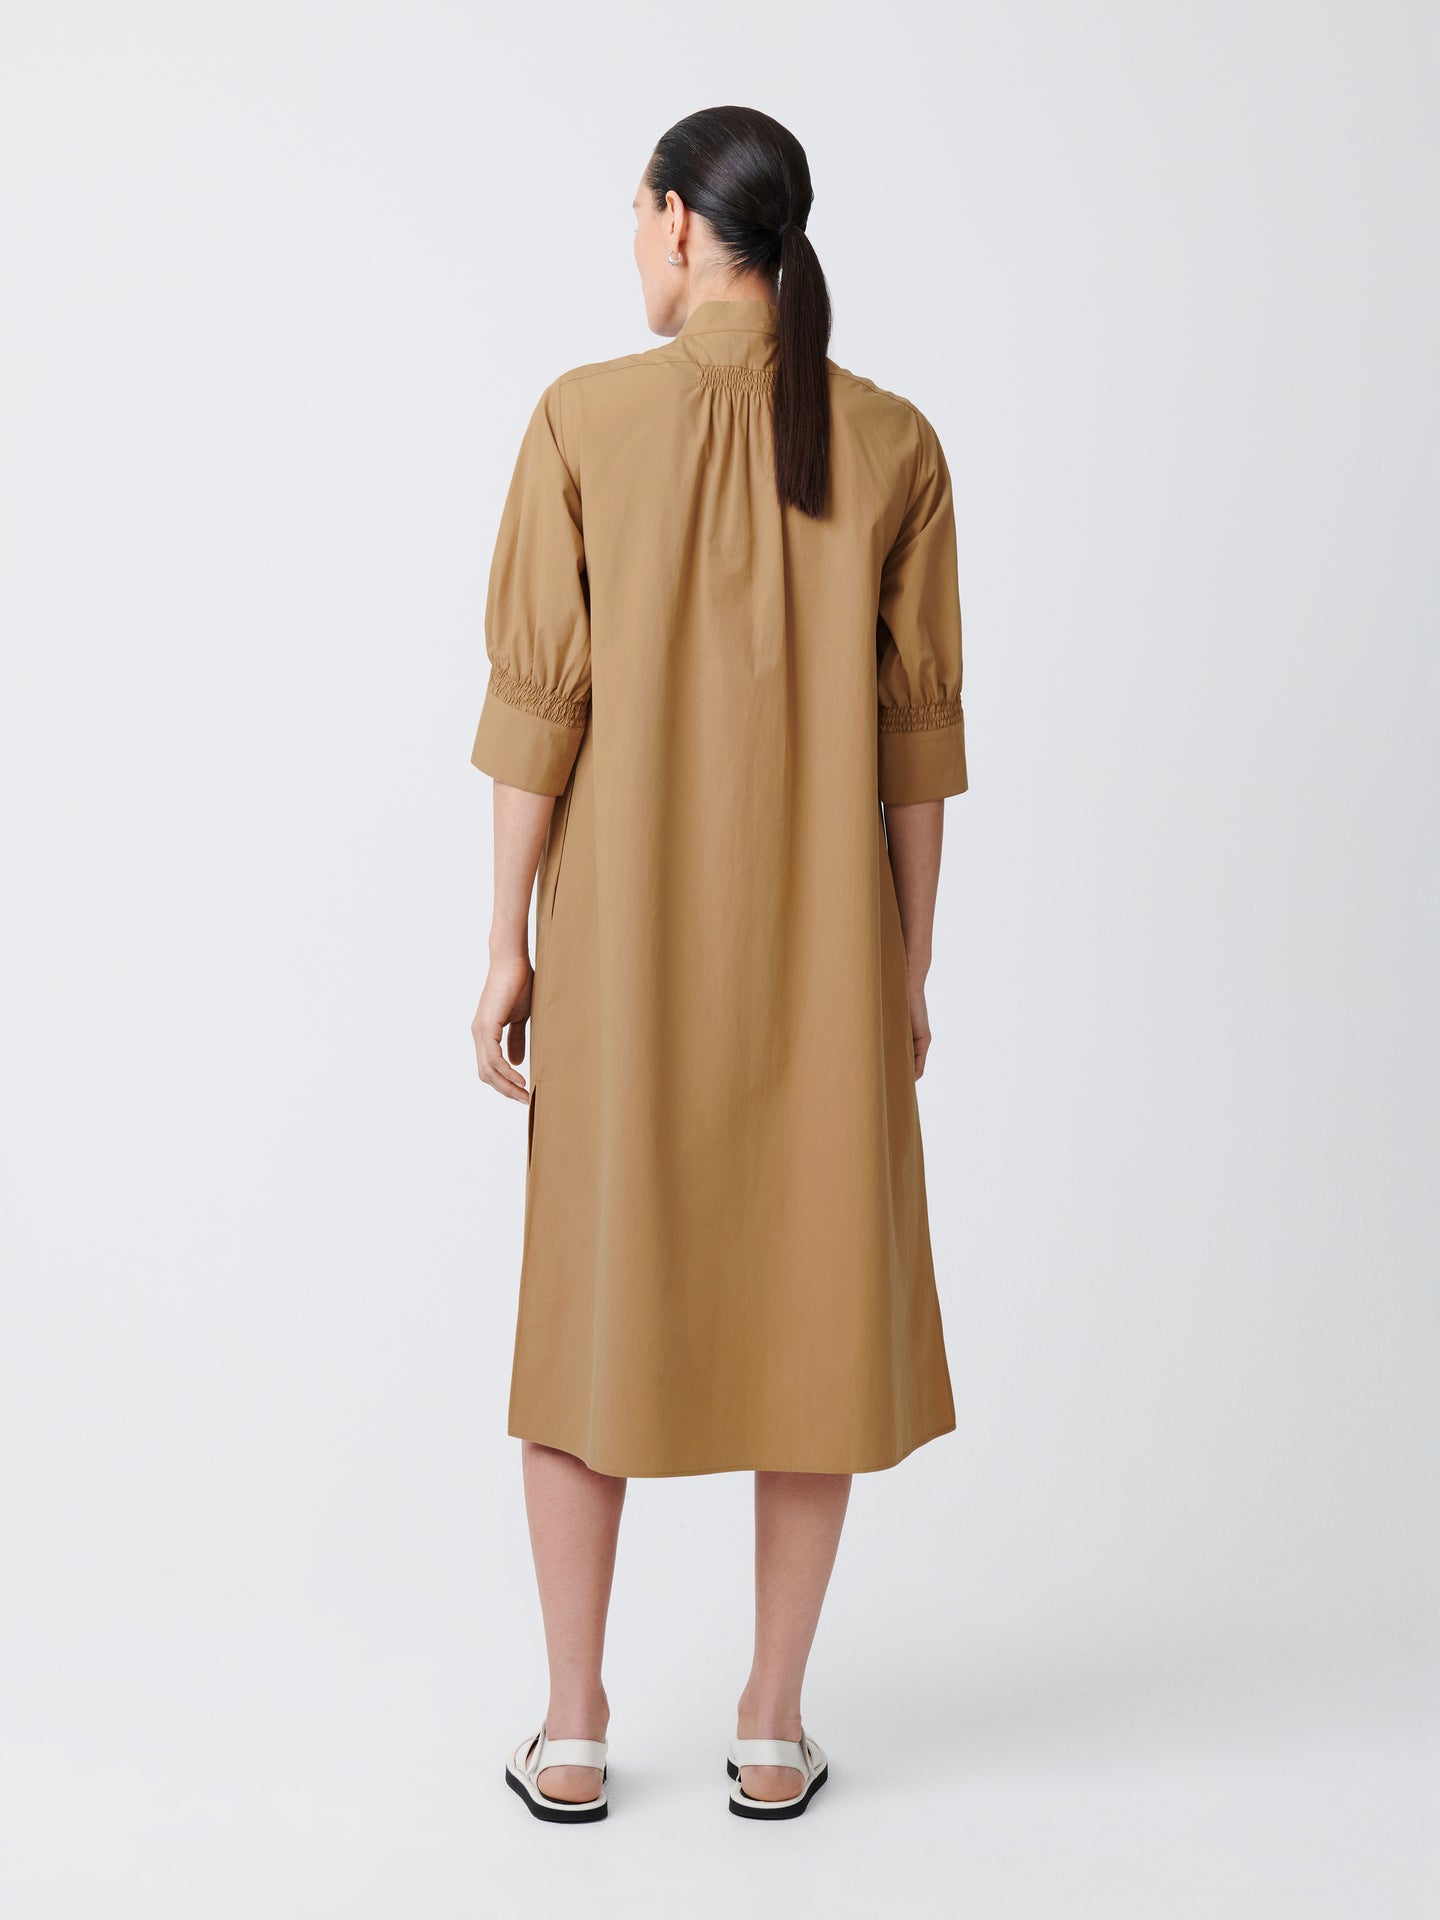 KNOLL DRESS IN SAND